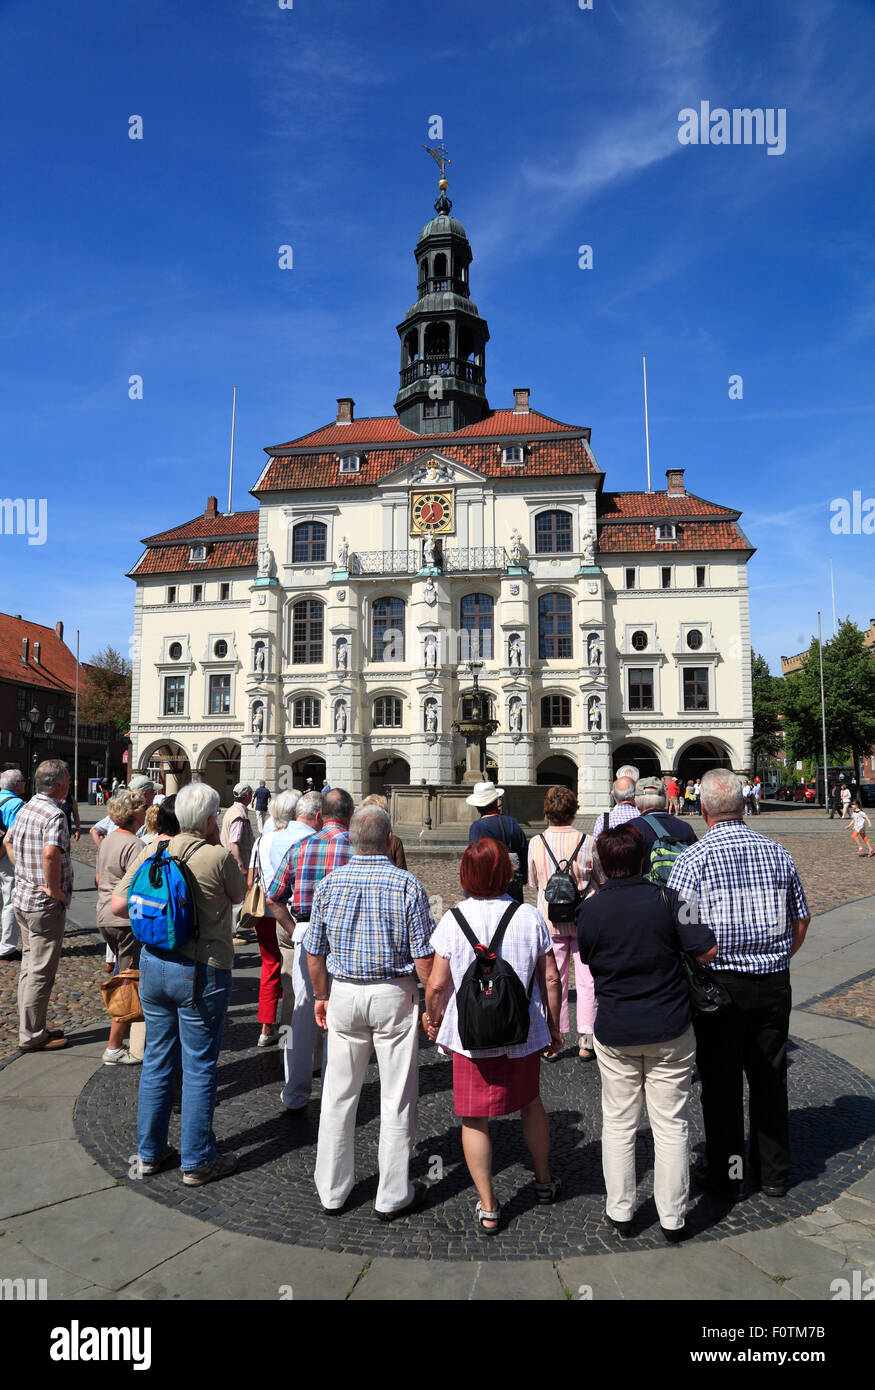 Guided sightseeing tour at market square  in front of the town hall, Lueneburg, Lüneburg, Lower Saxony, Germany, Europe Stock Photo